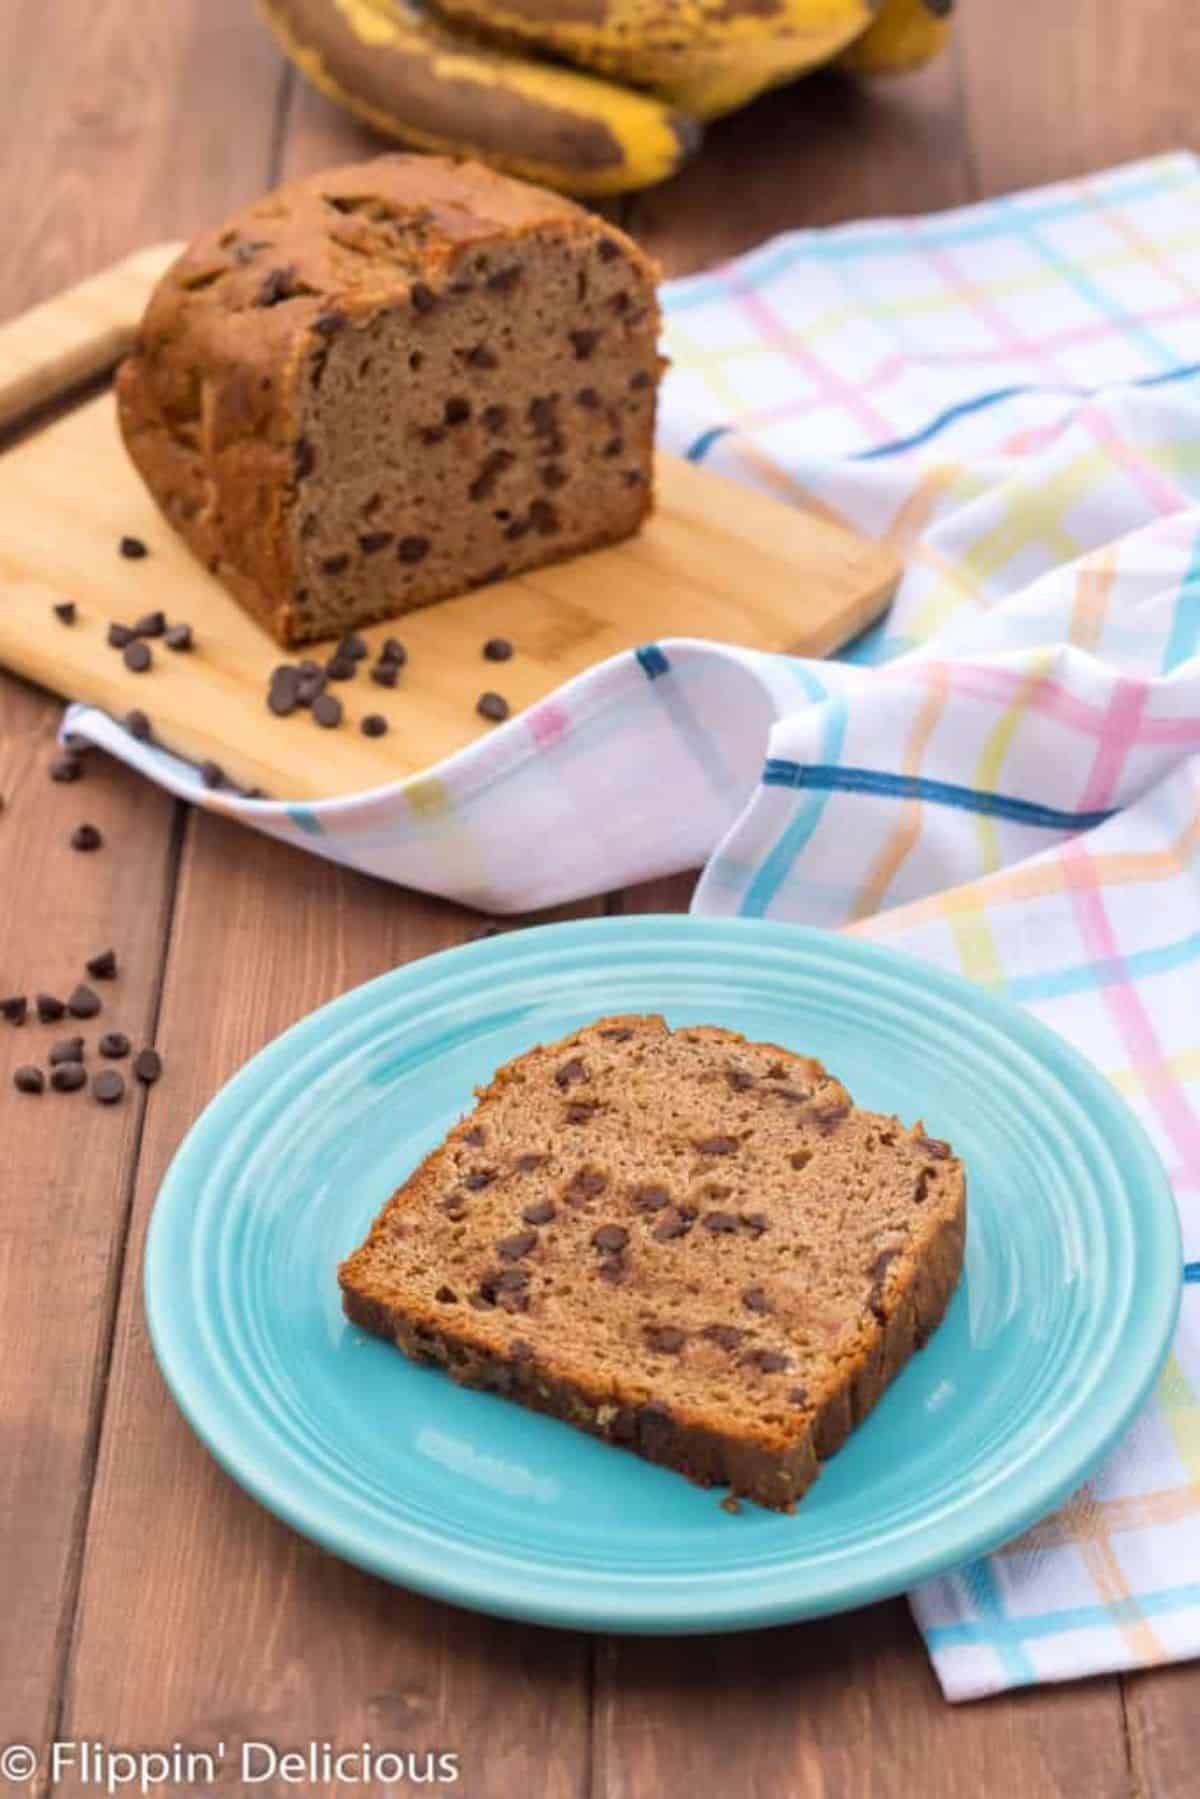 A loaf of Gluten-free Chocolate Chip Banana Bread on a wooden cutting board, a slice of Gluten-free Chocolate Chip Banana Bread on a blue  plate.